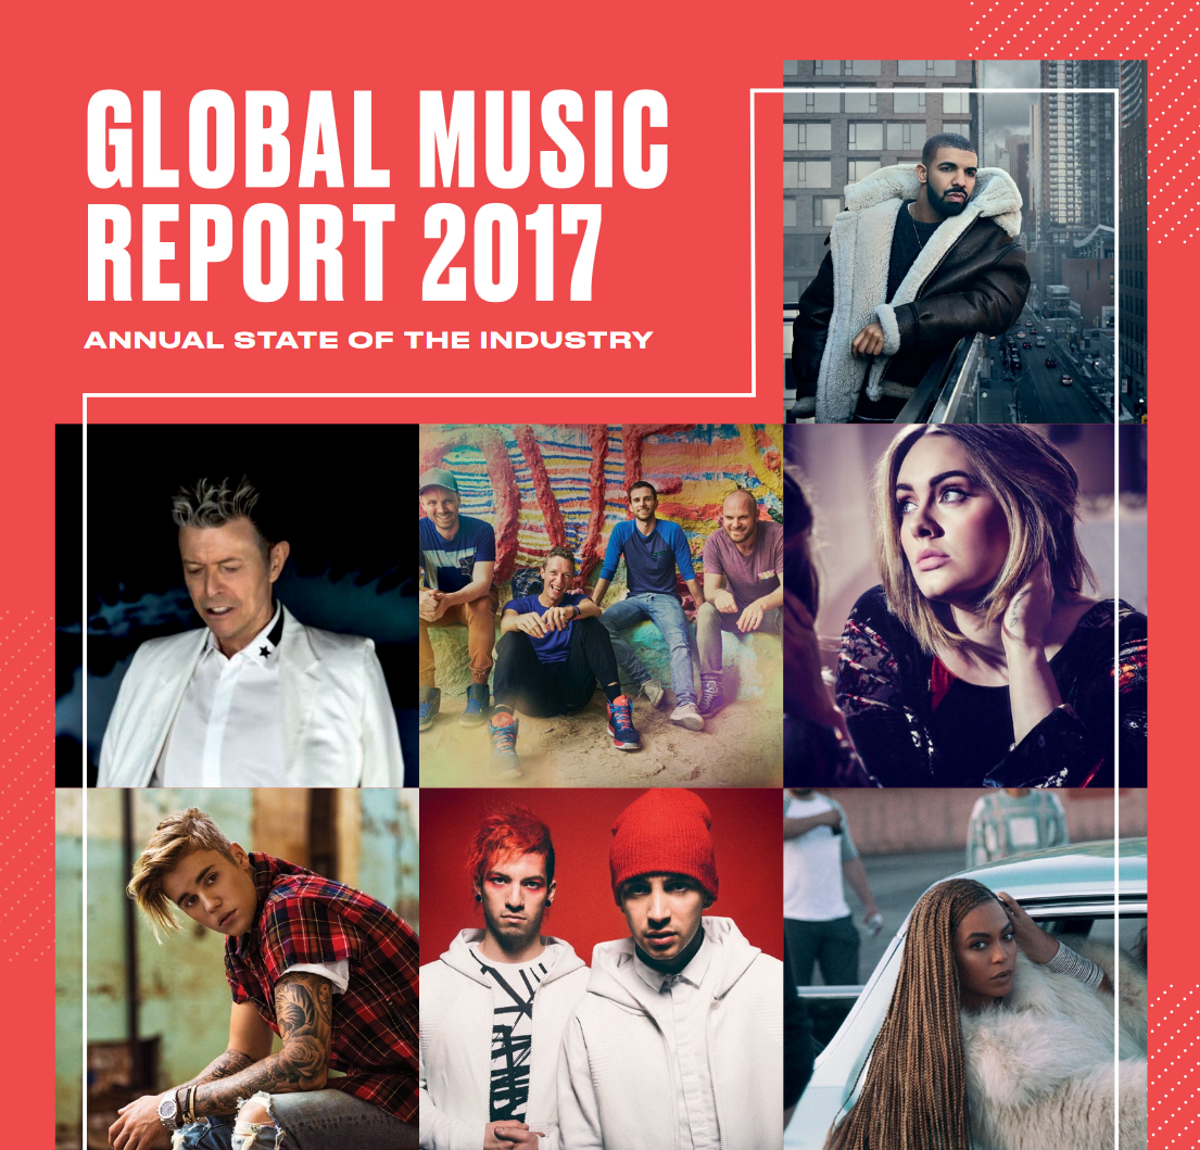 IFPI Global Music Report shows recorded music revenues up by 5.9%